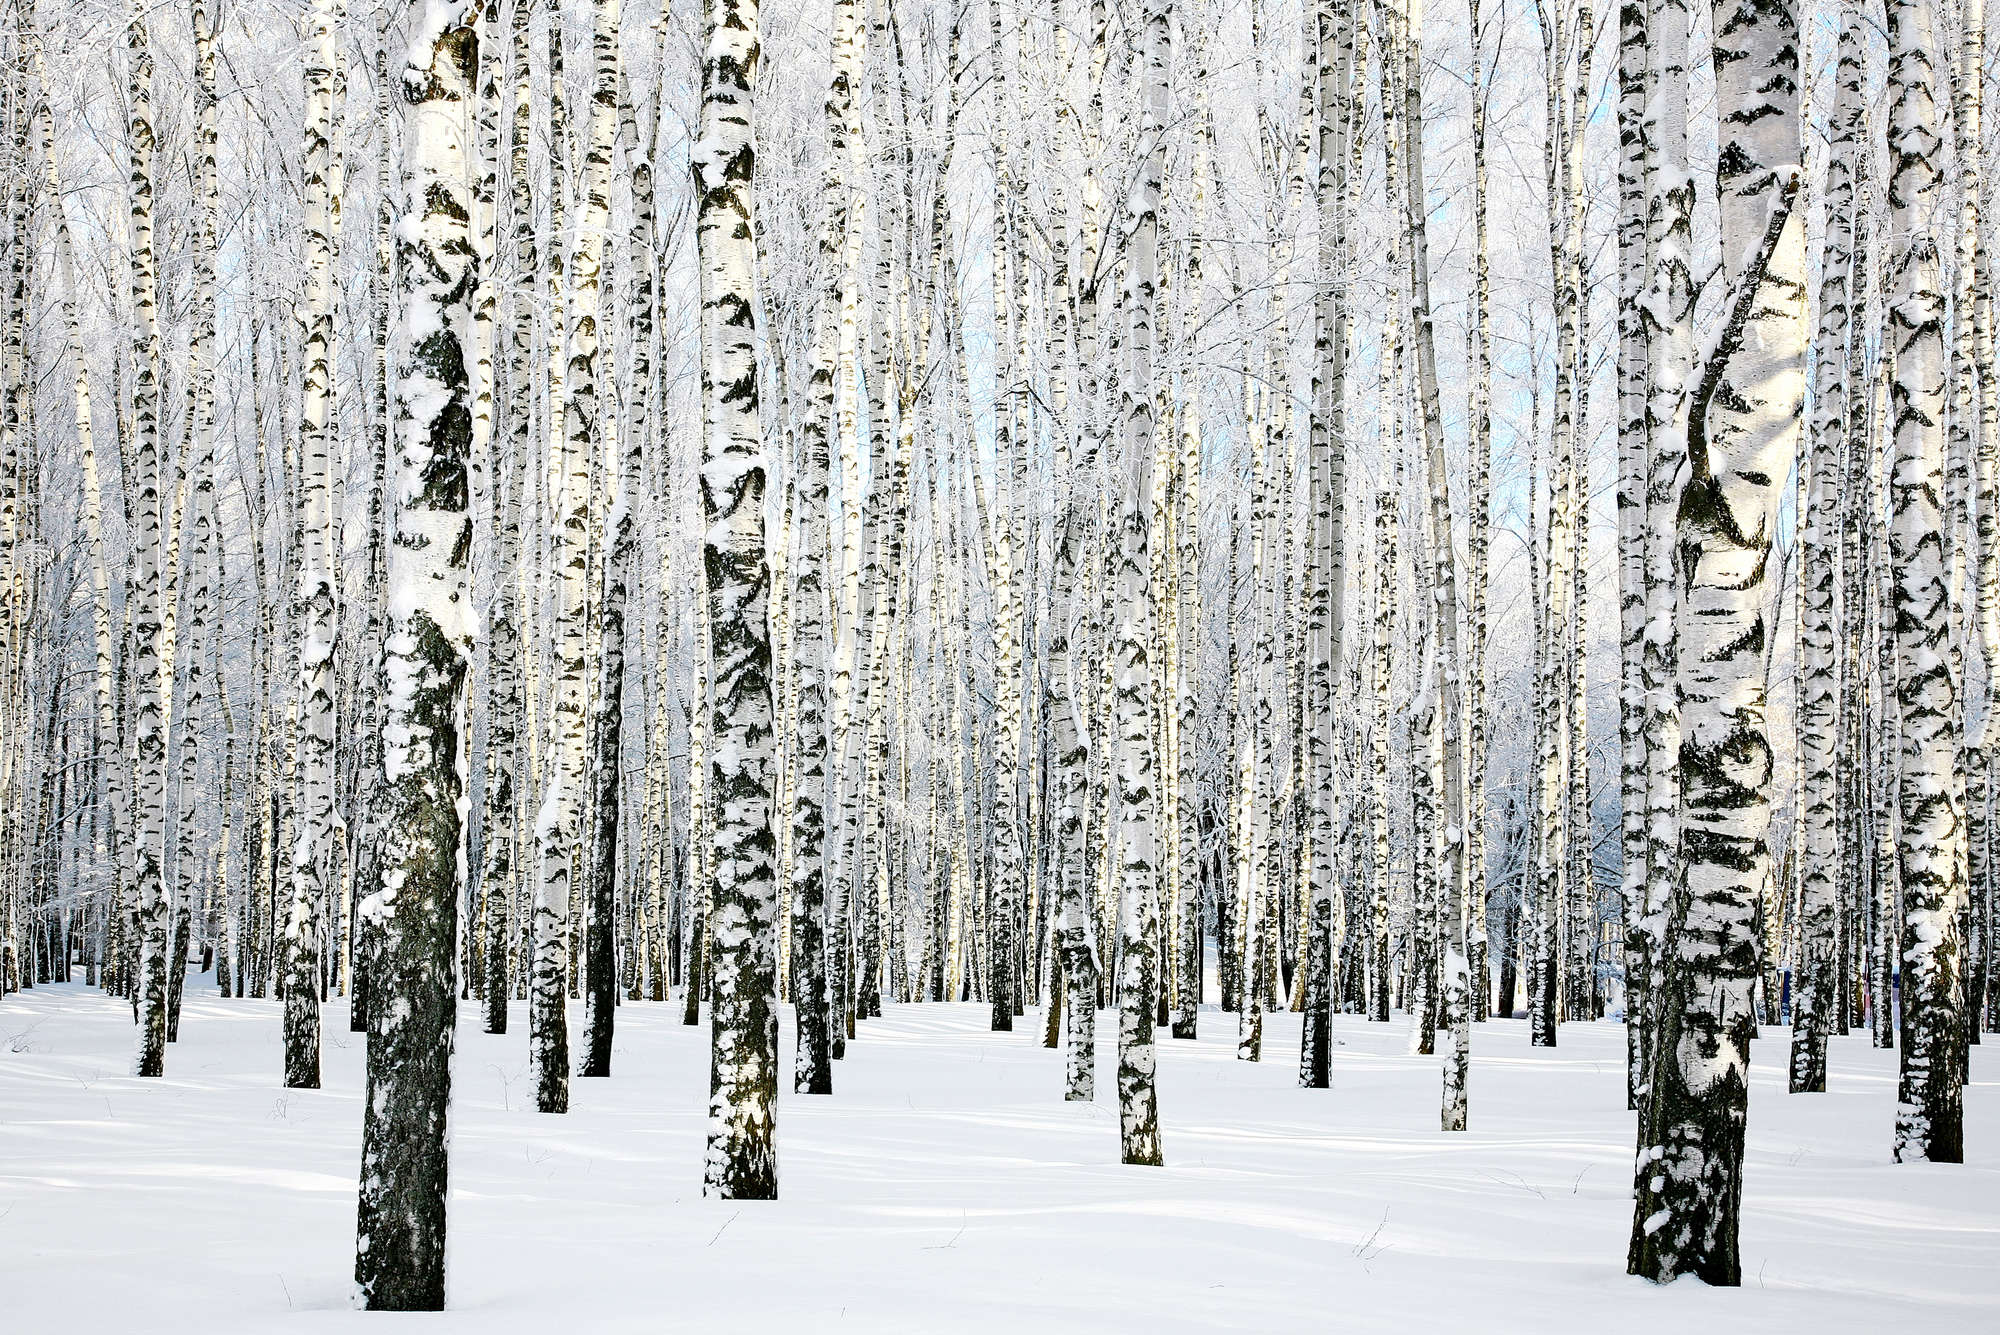             Nature wall mural birch forest in winter on textured non-woven
        